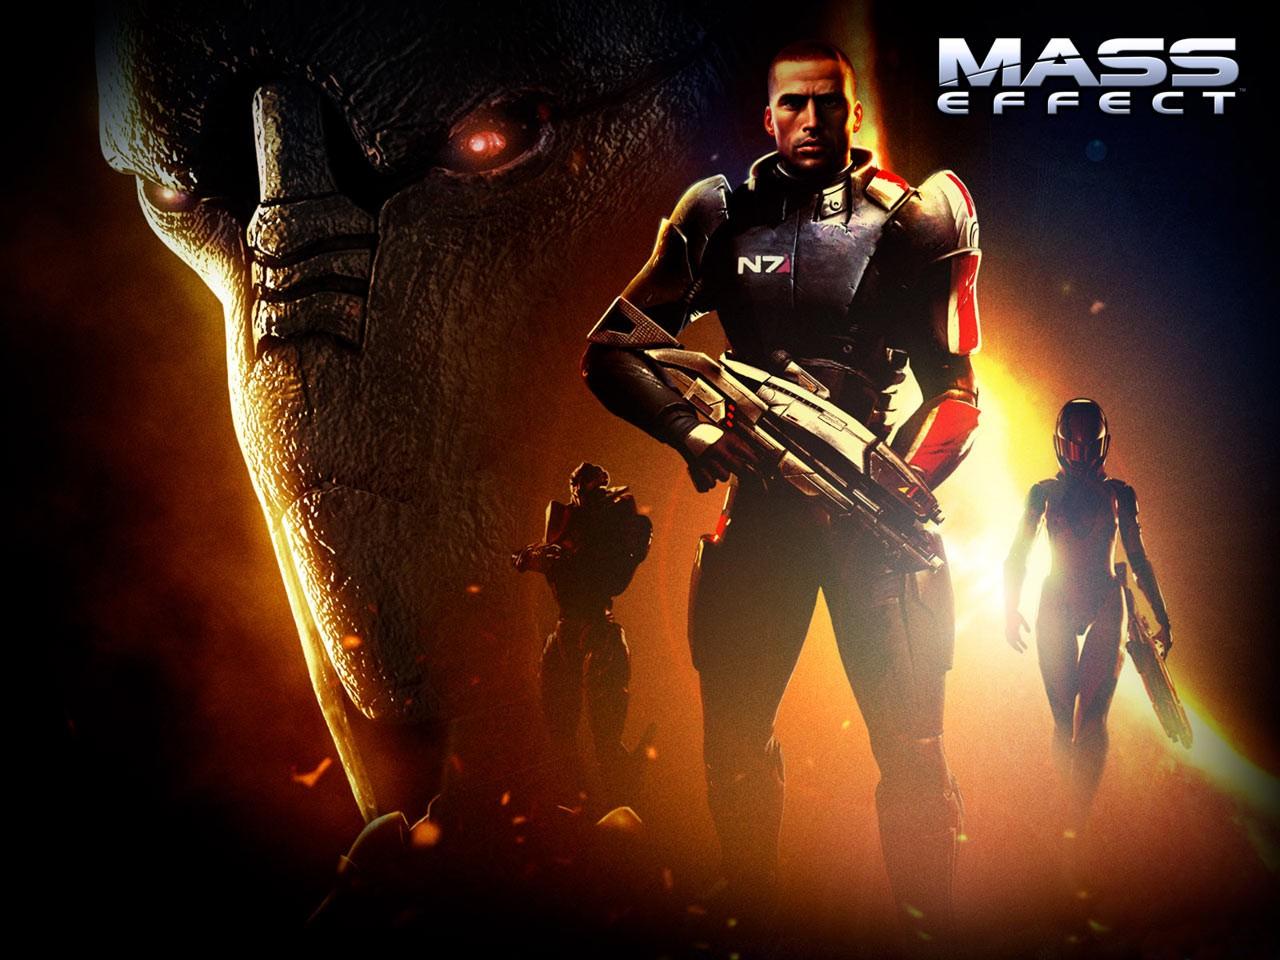 Free Download Mass Effect Wallpapers Games Wallpapers X For Your Desktop Mobile